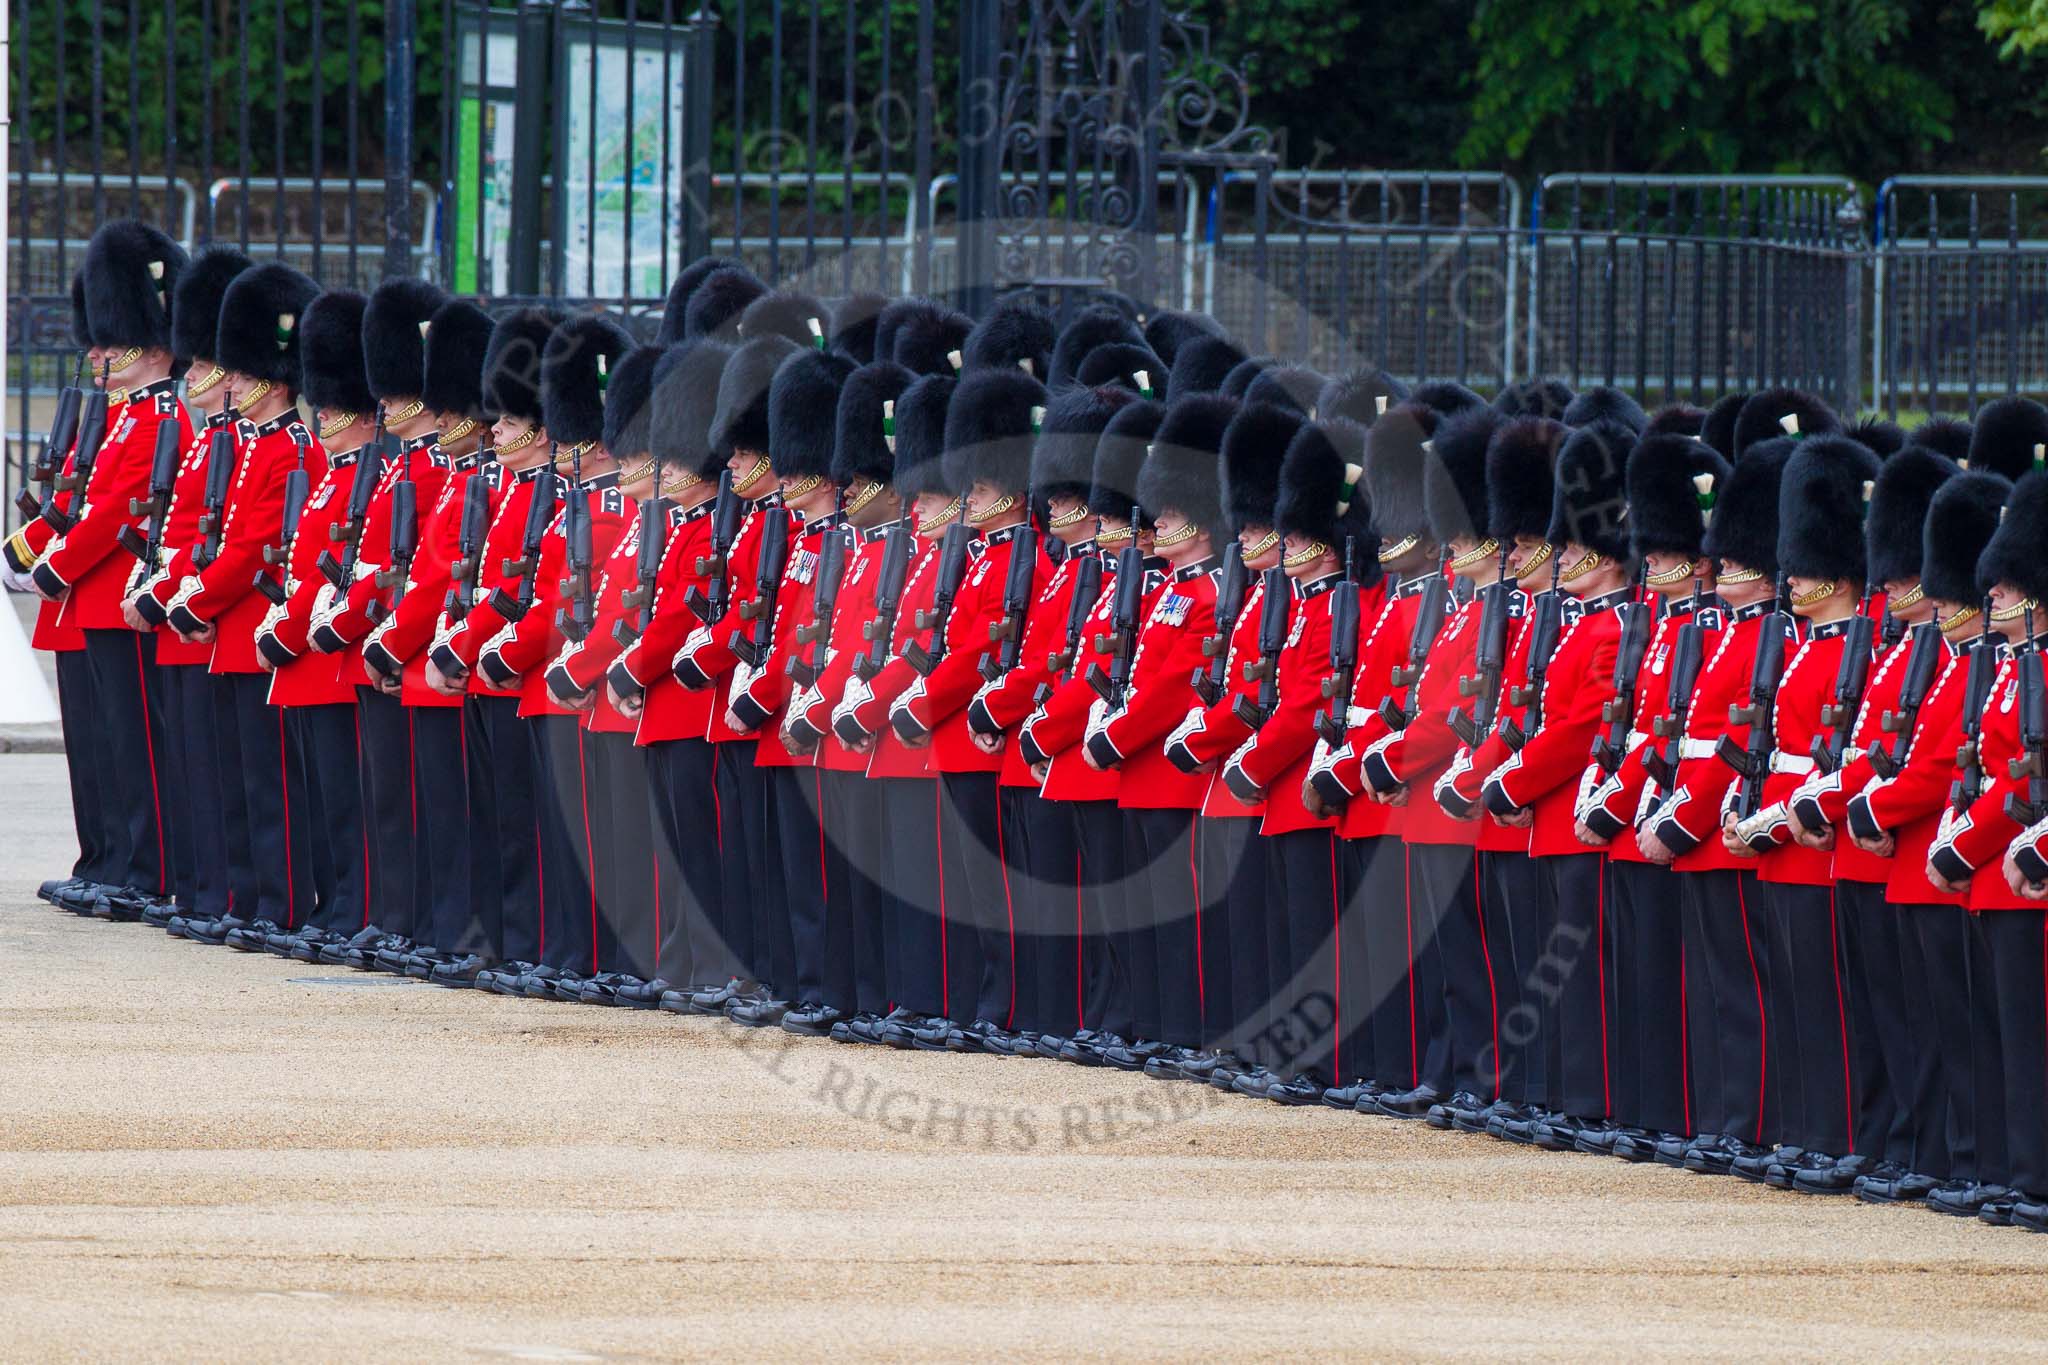 Major General's Review 2013: No.3 Guard, 1st Battalion Welsh Guards..
Horse Guards Parade, Westminster,
London SW1,

United Kingdom,
on 01 June 2013 at 10:34, image #141